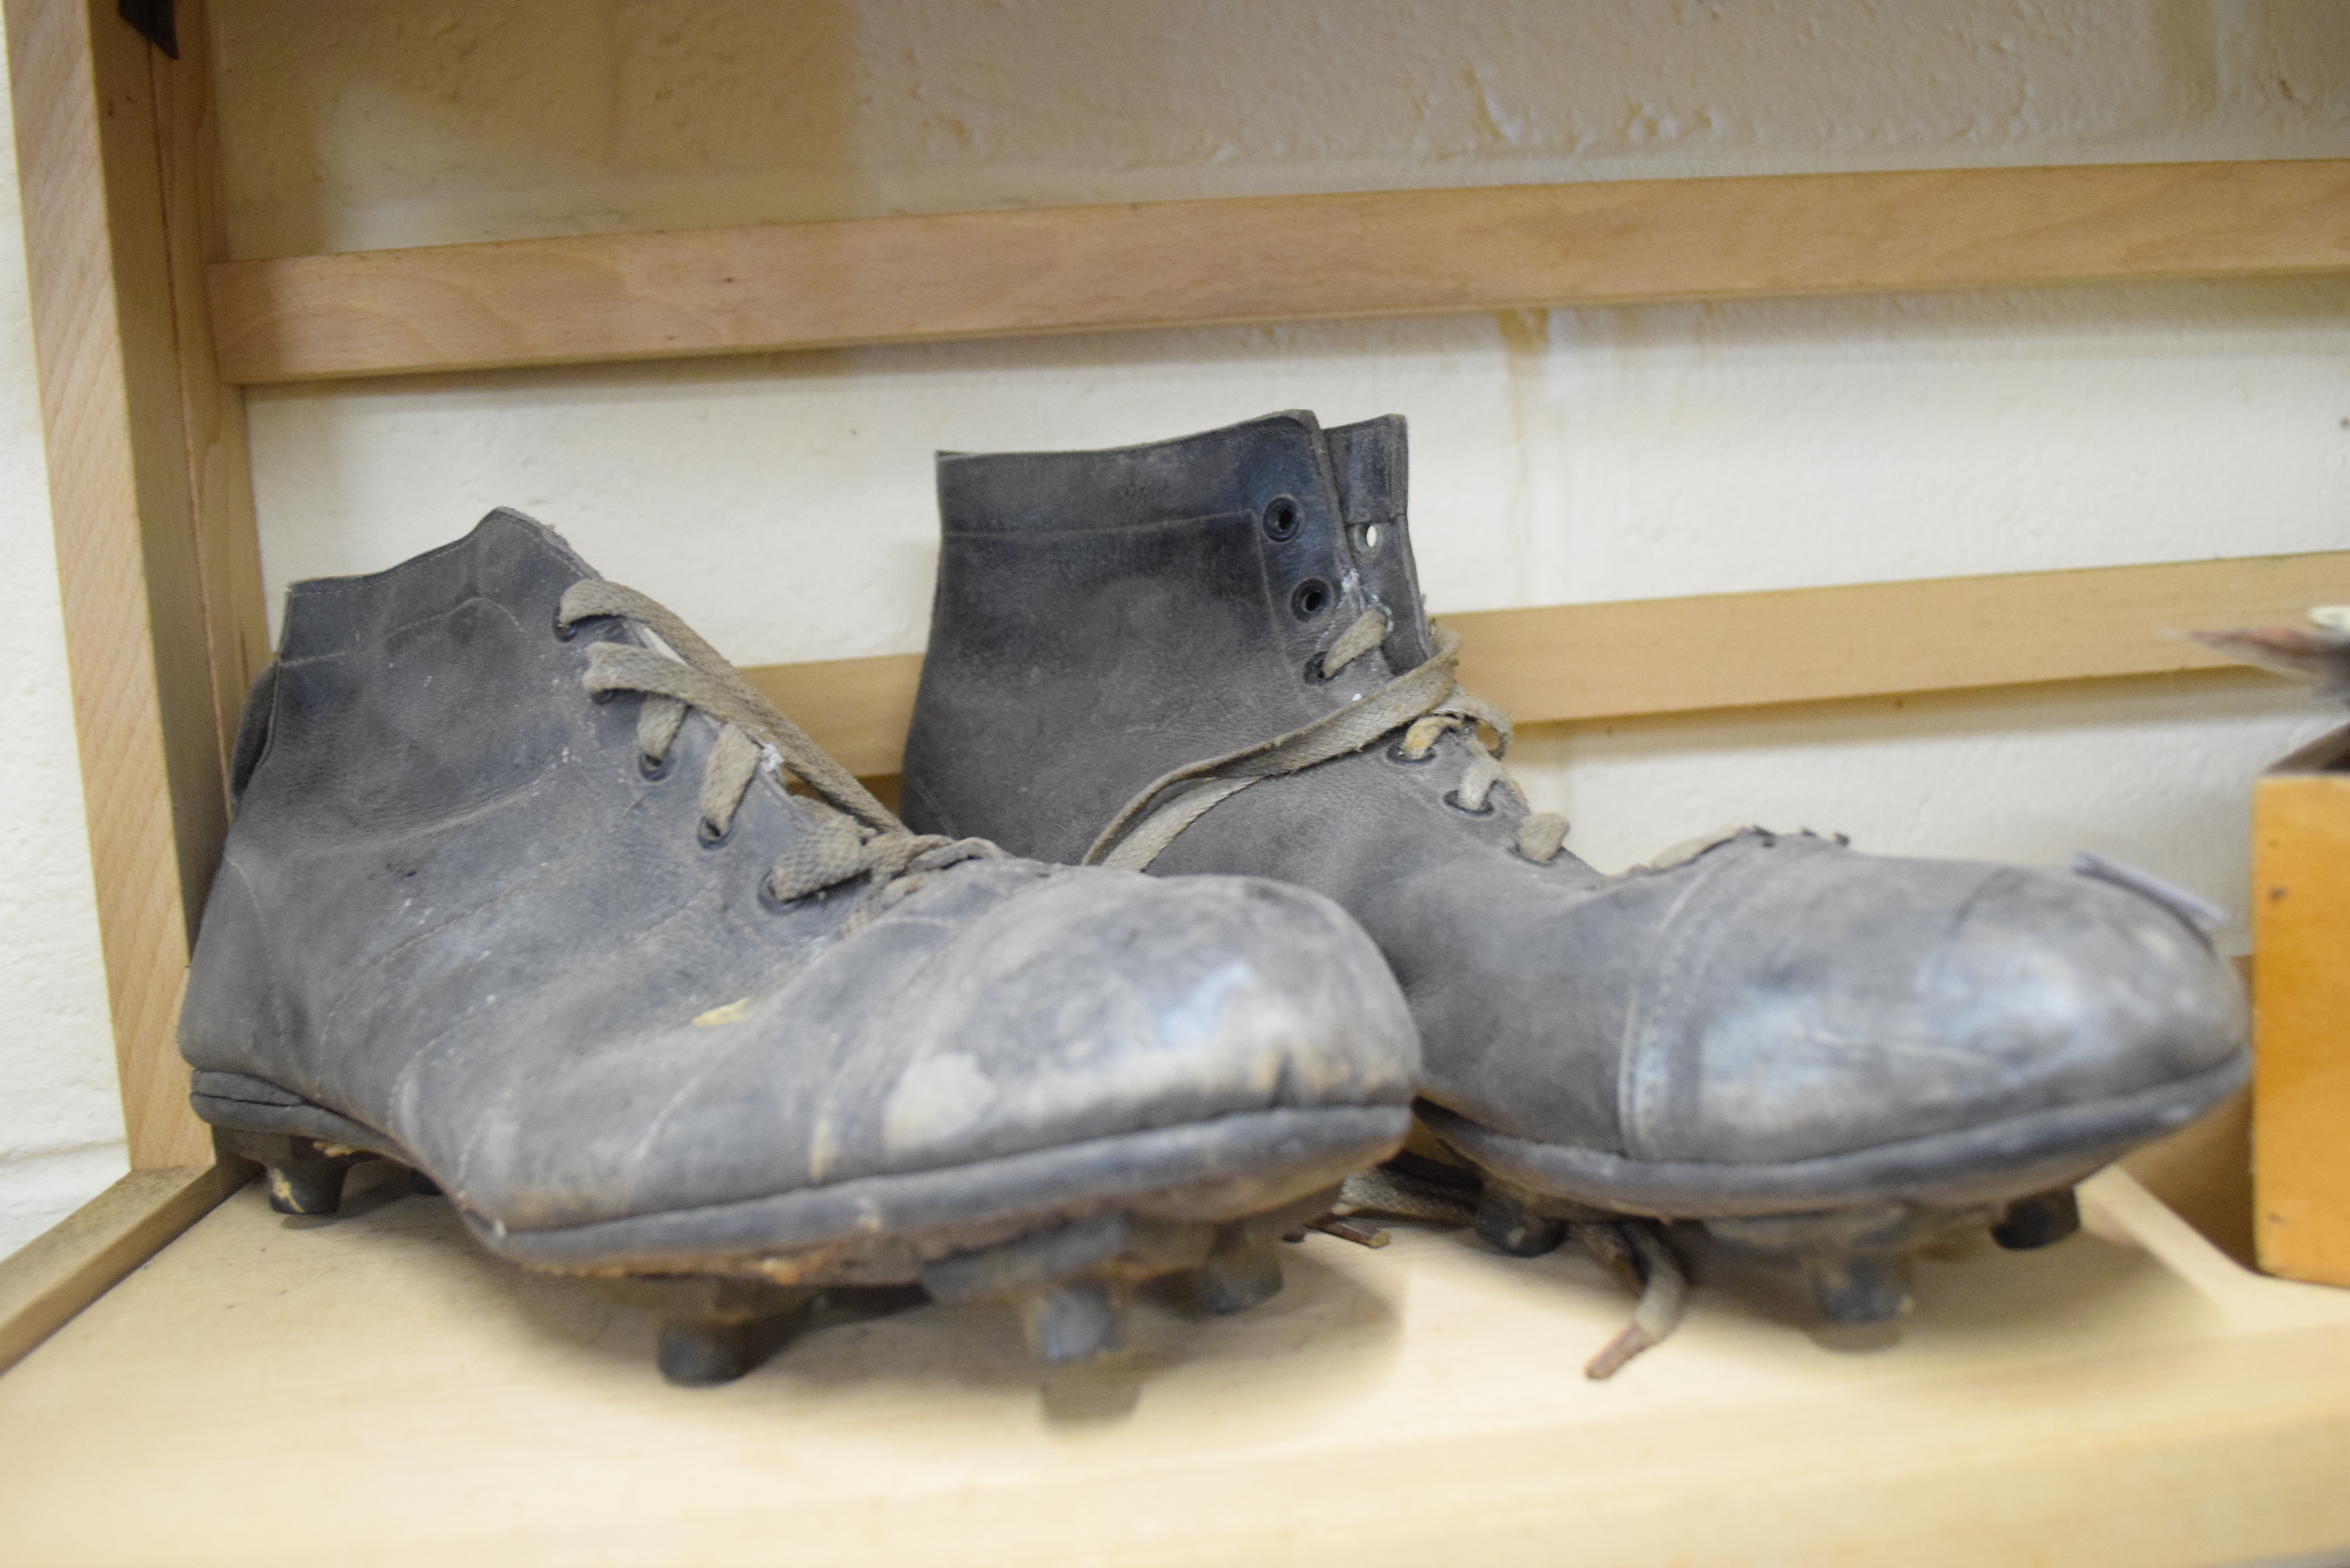 Pair of vintage sports style boots - Image 2 of 2